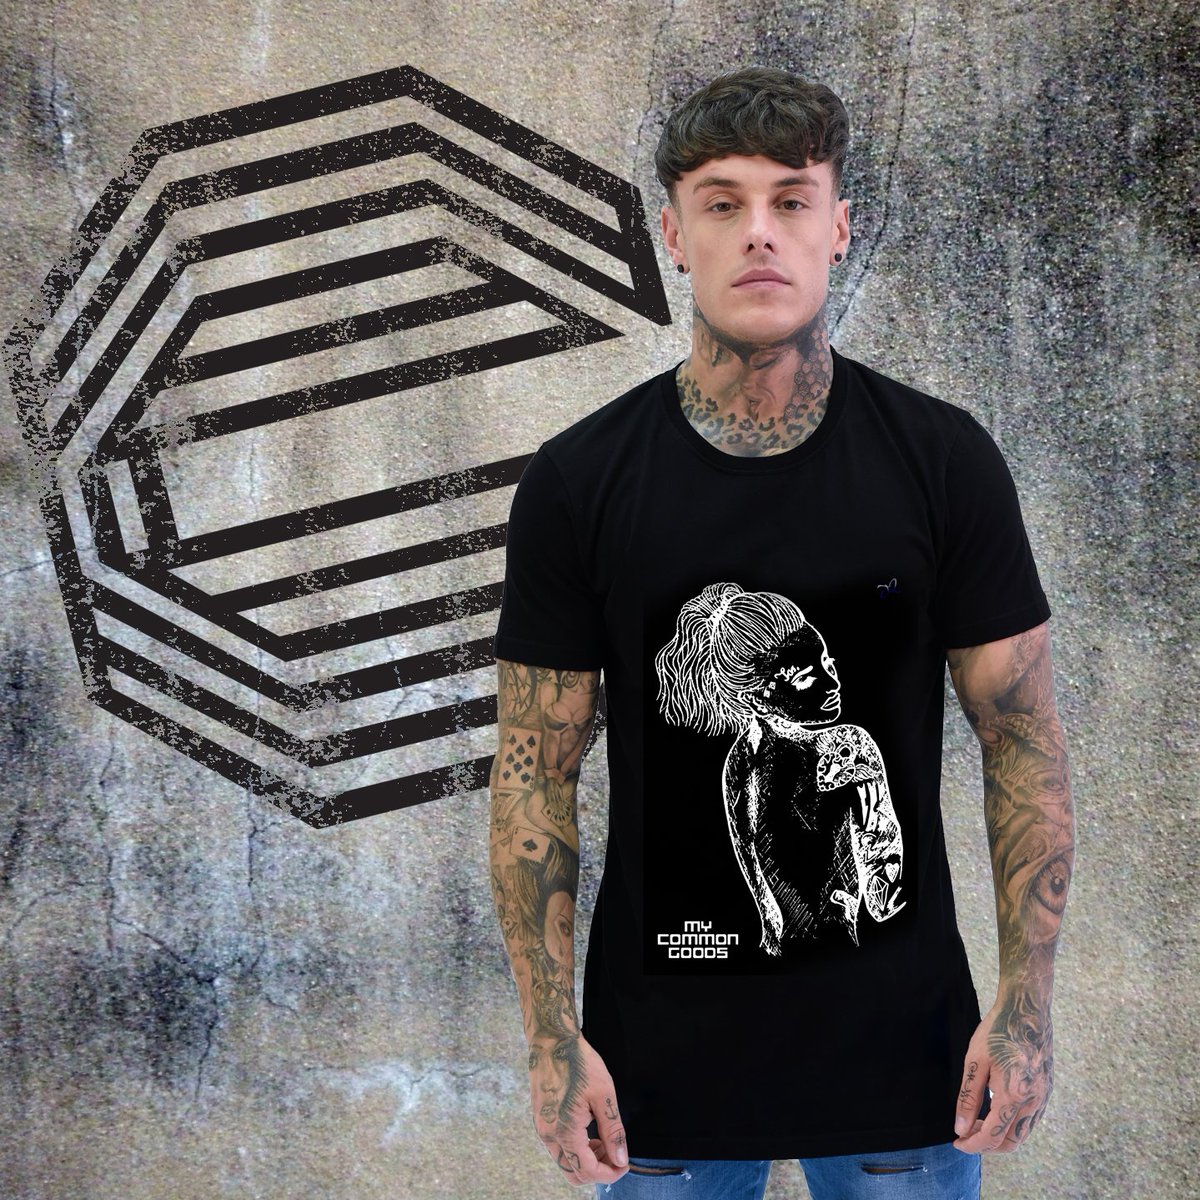 RT @boundarypusher: Limited edition Black @jem_lucy tee available now ???? #MCGSwatch https://t.co/Len72ya740 https://t.co/G2MGv3rR1p